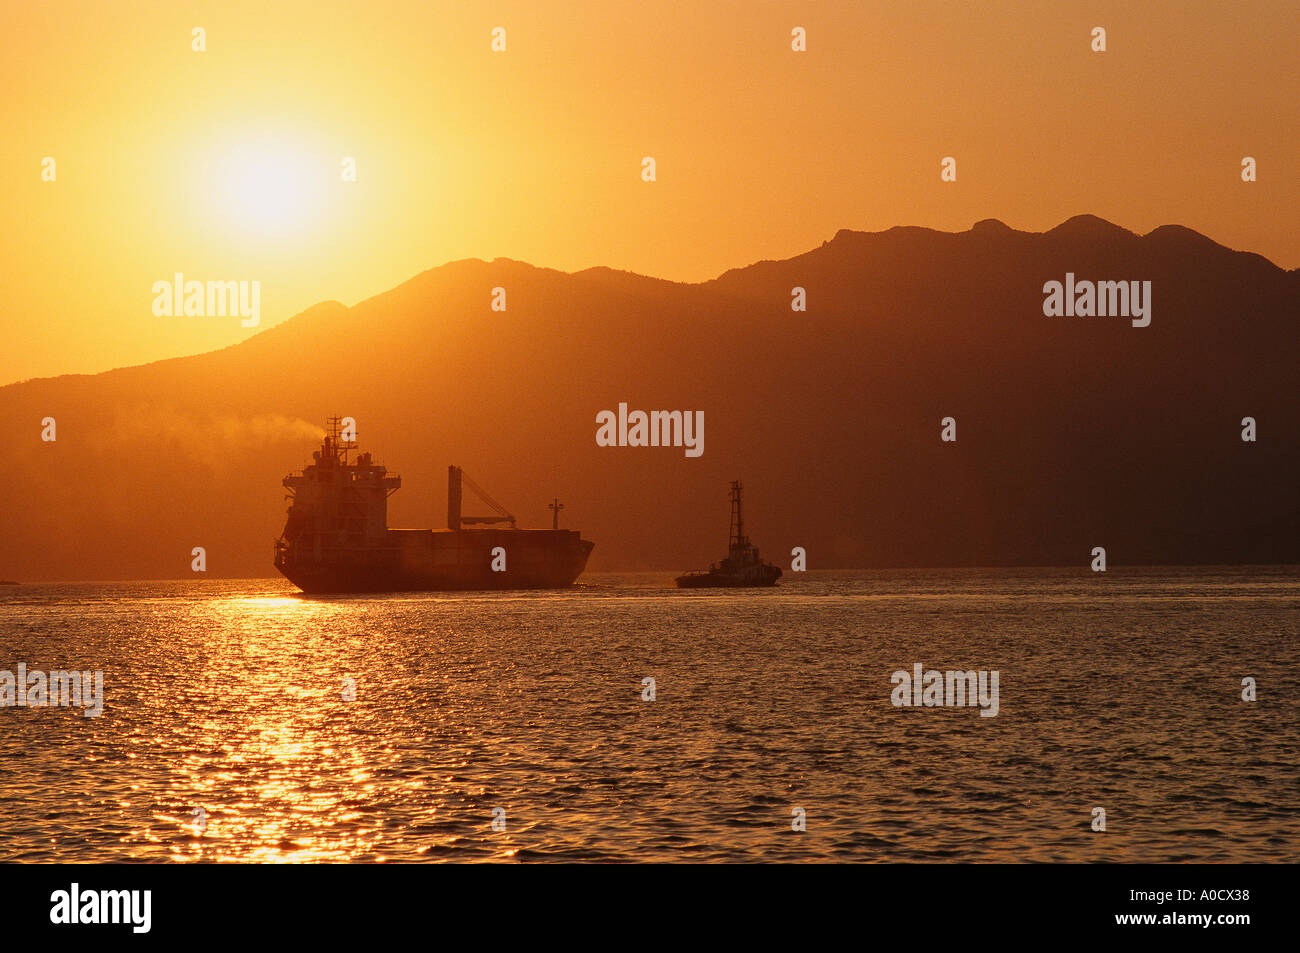 A ship being towed by a tug out of port at sunset Subic Bay Freeport Zone Luzon Philippines Stock Photo